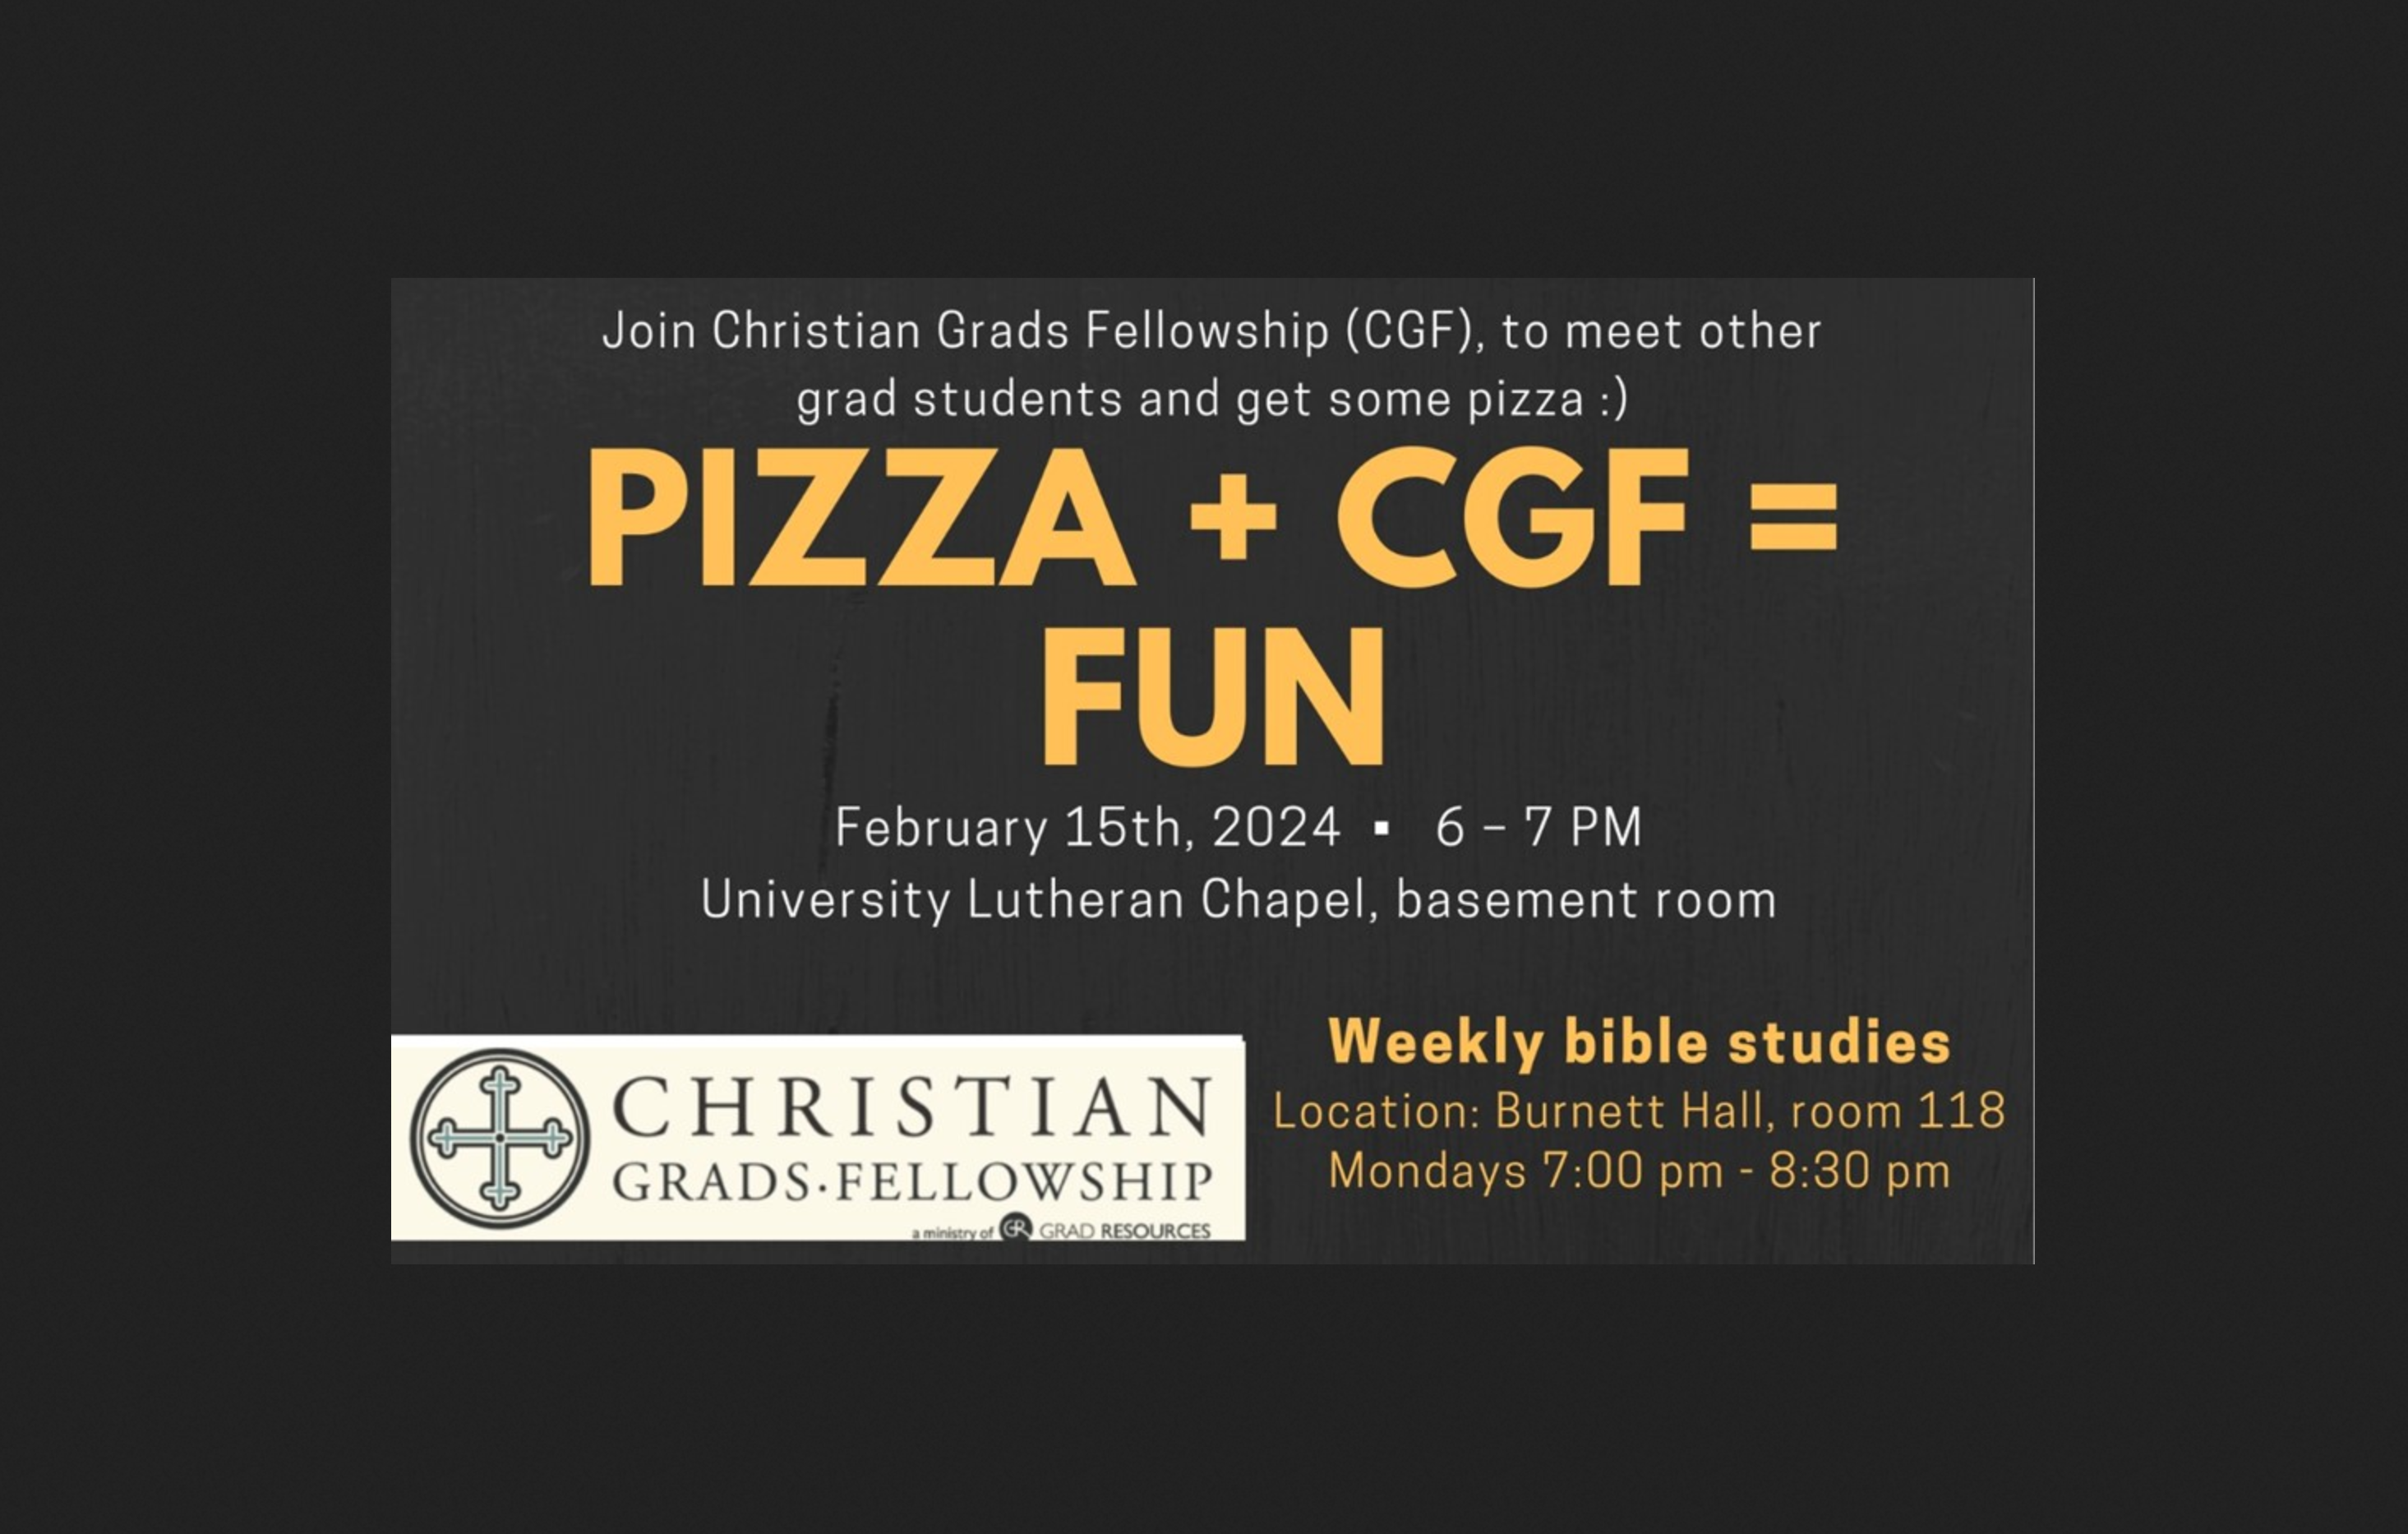 A flyer depicting PIZZA + CGF = FUN, providing information on the pizza party February 15, 6pm at the University Lutheran Chapel.